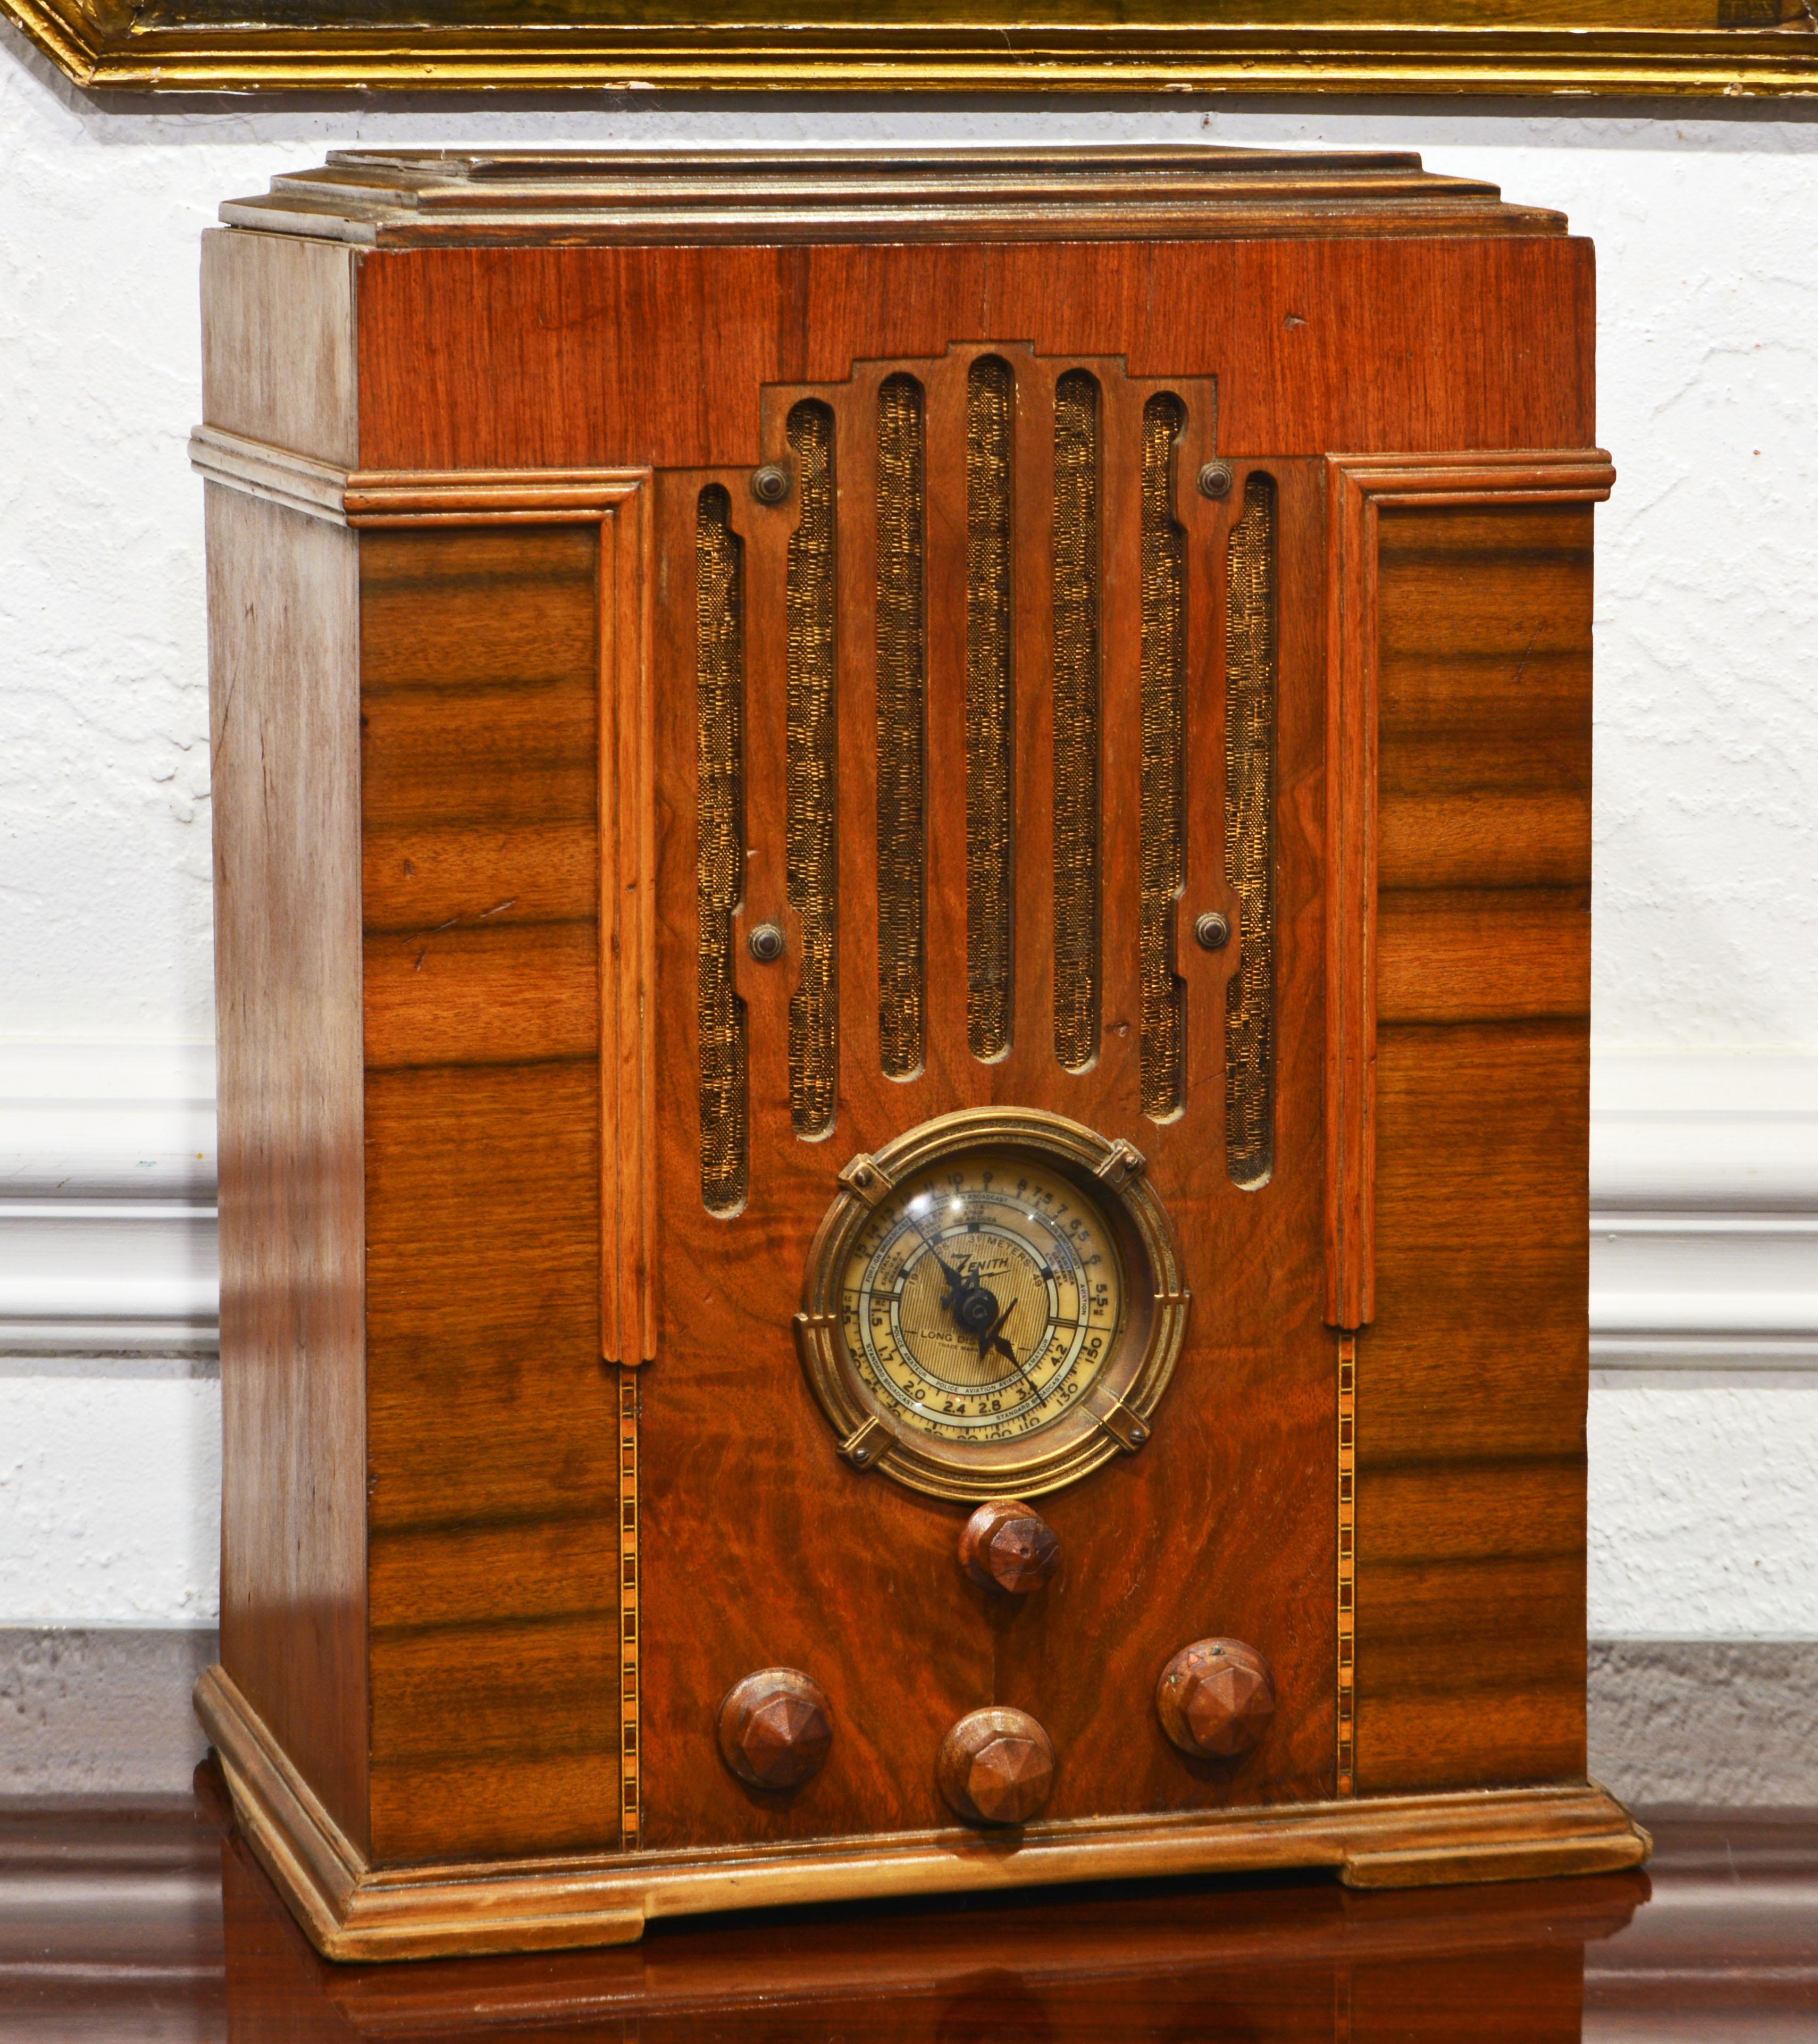 This item is sold as a decorative item only. The technical parts work to a certain extend with light in the dial and several tubes. The sound also works, but we haven't been able to pick up a station. That will be for radio experts. The radio is